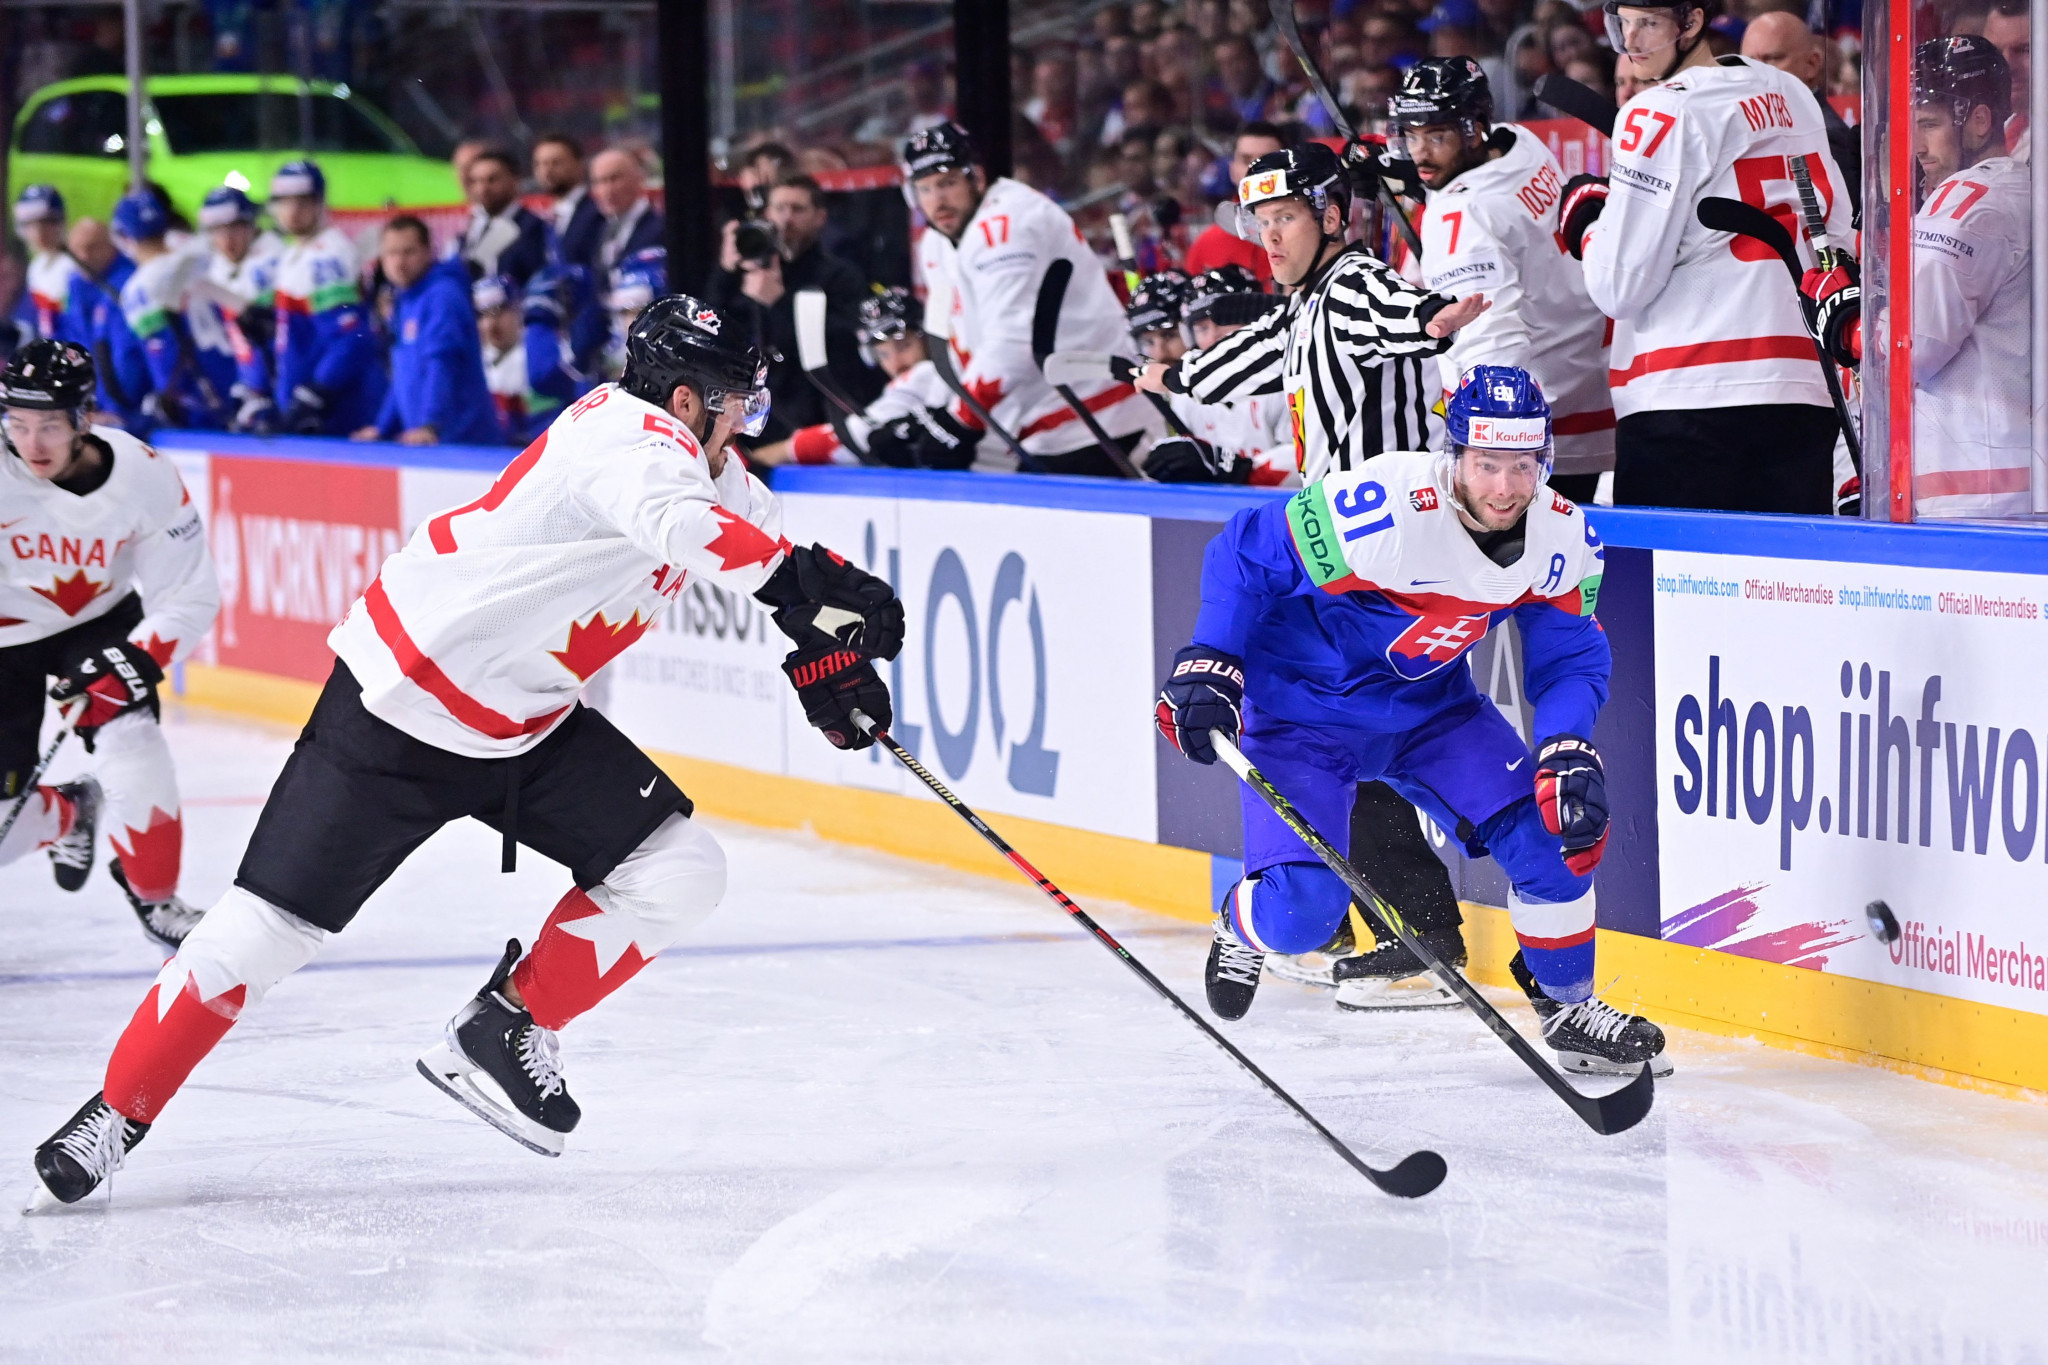 US and Canada retain unbeaten records at Ice Hockey World Championships but are pushed hard